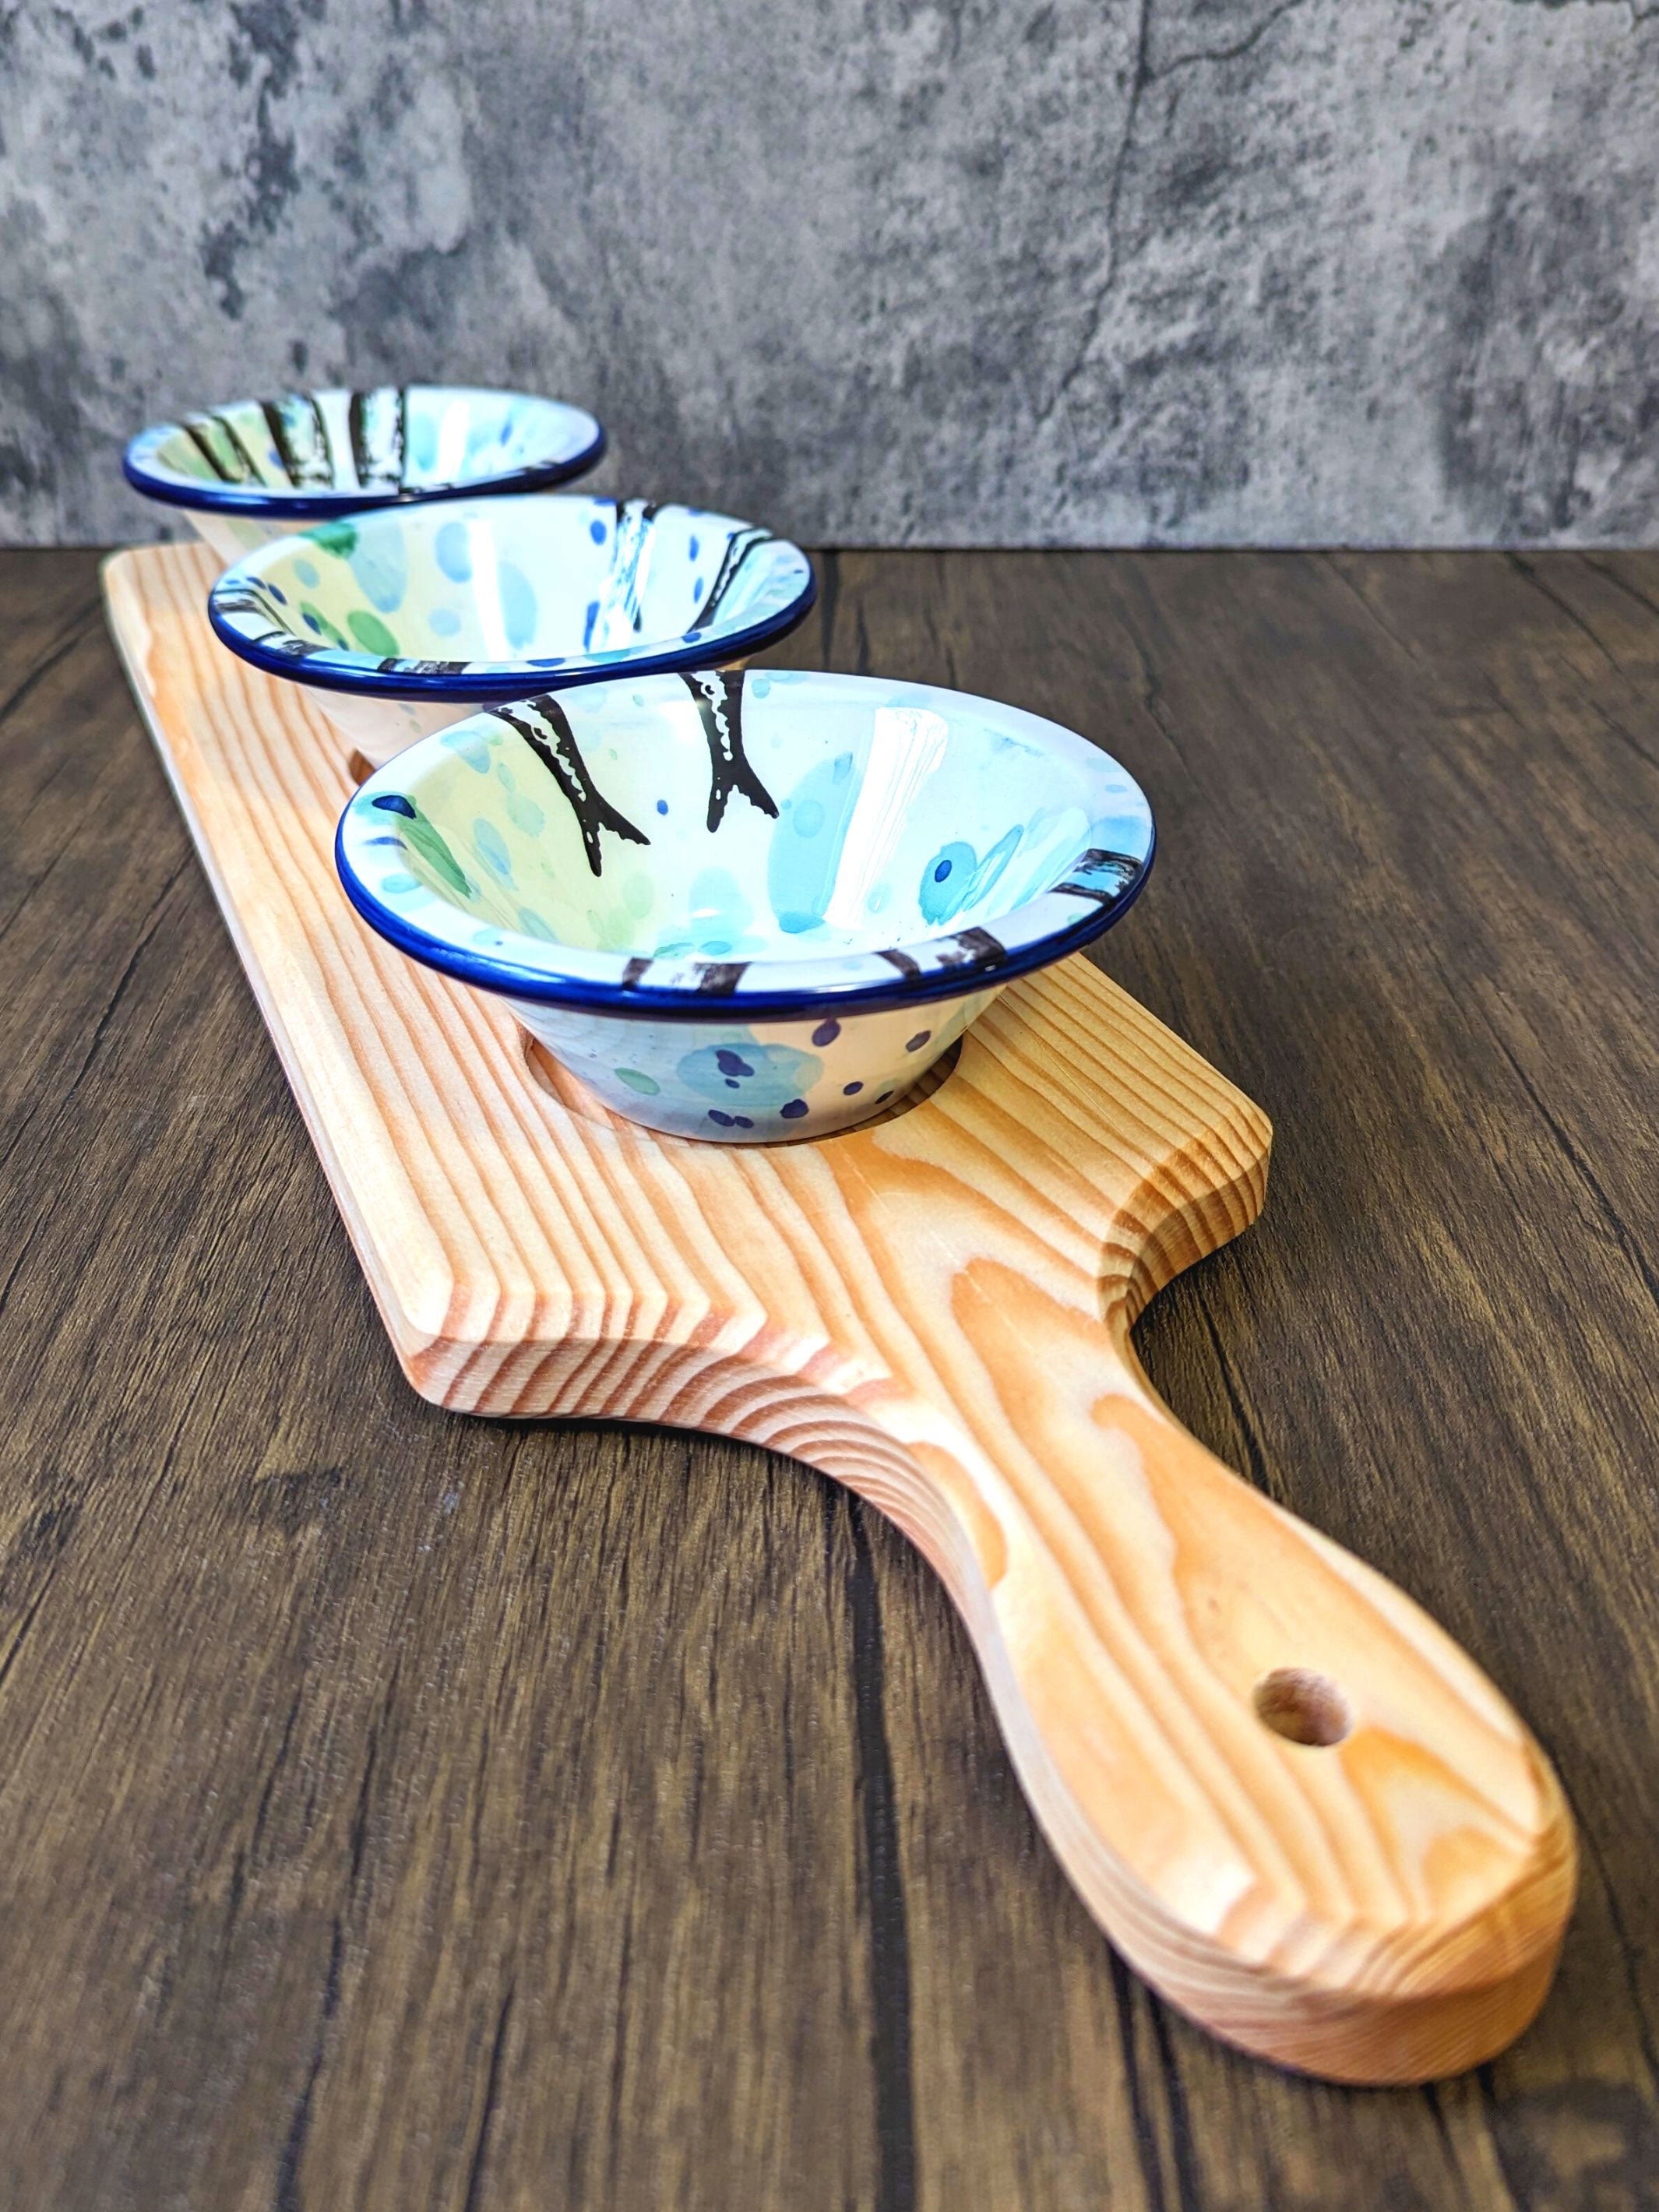 Chip and Dip Wooden Serving Board with 3 Ceramic Dipping Bowls